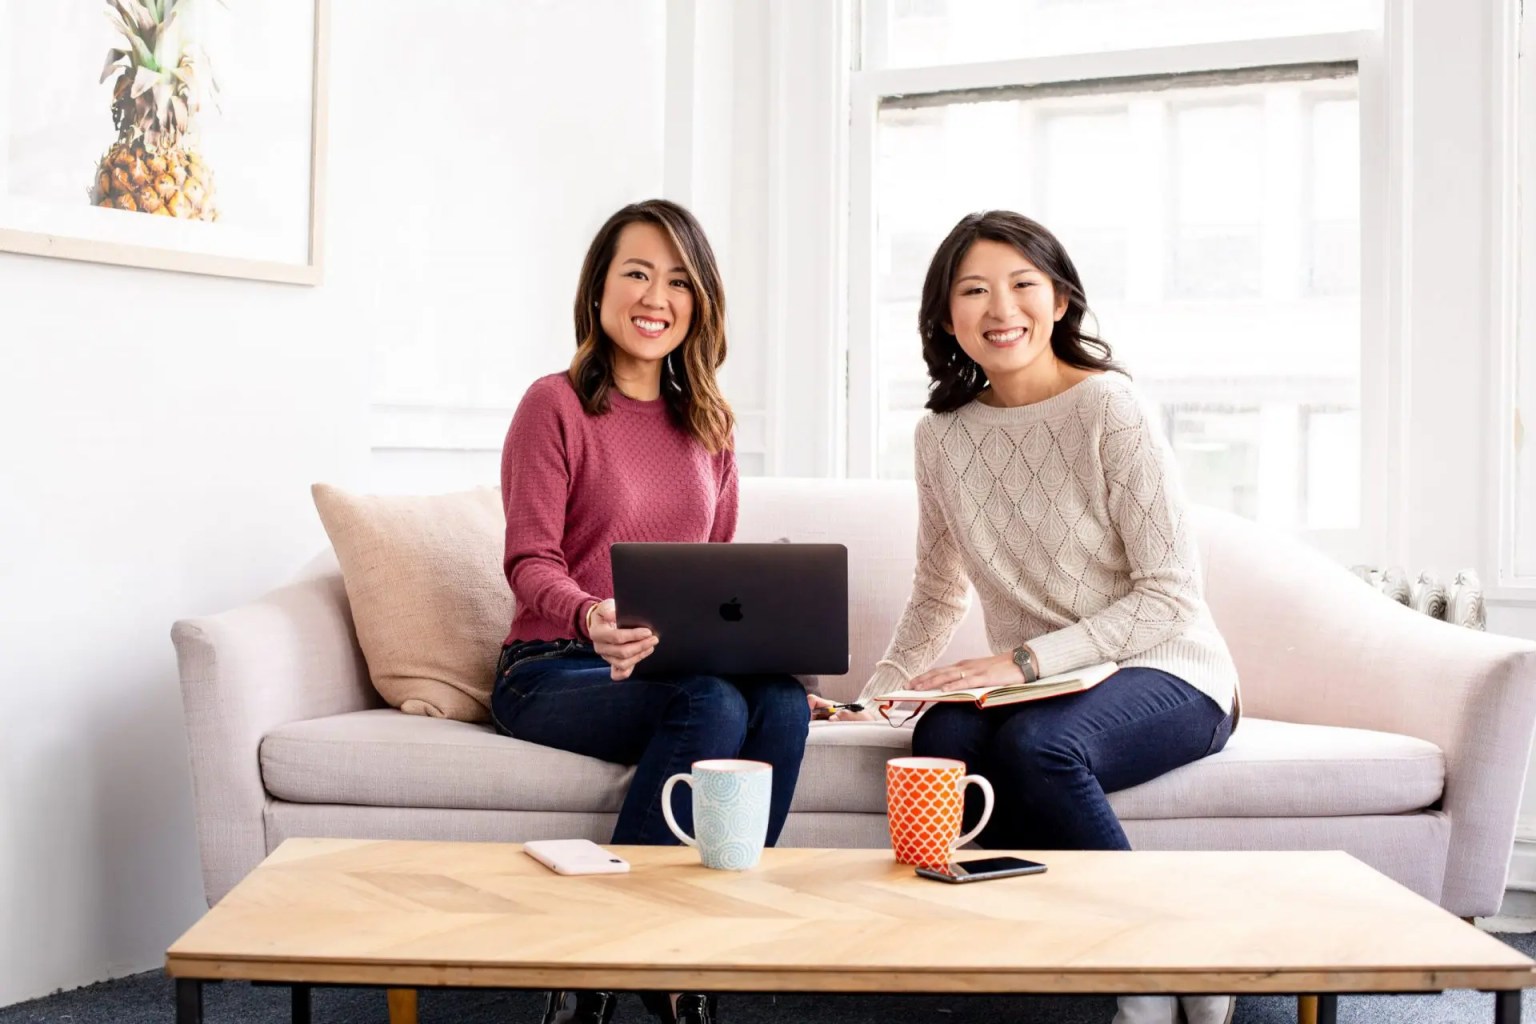 Two women smiling on a couch